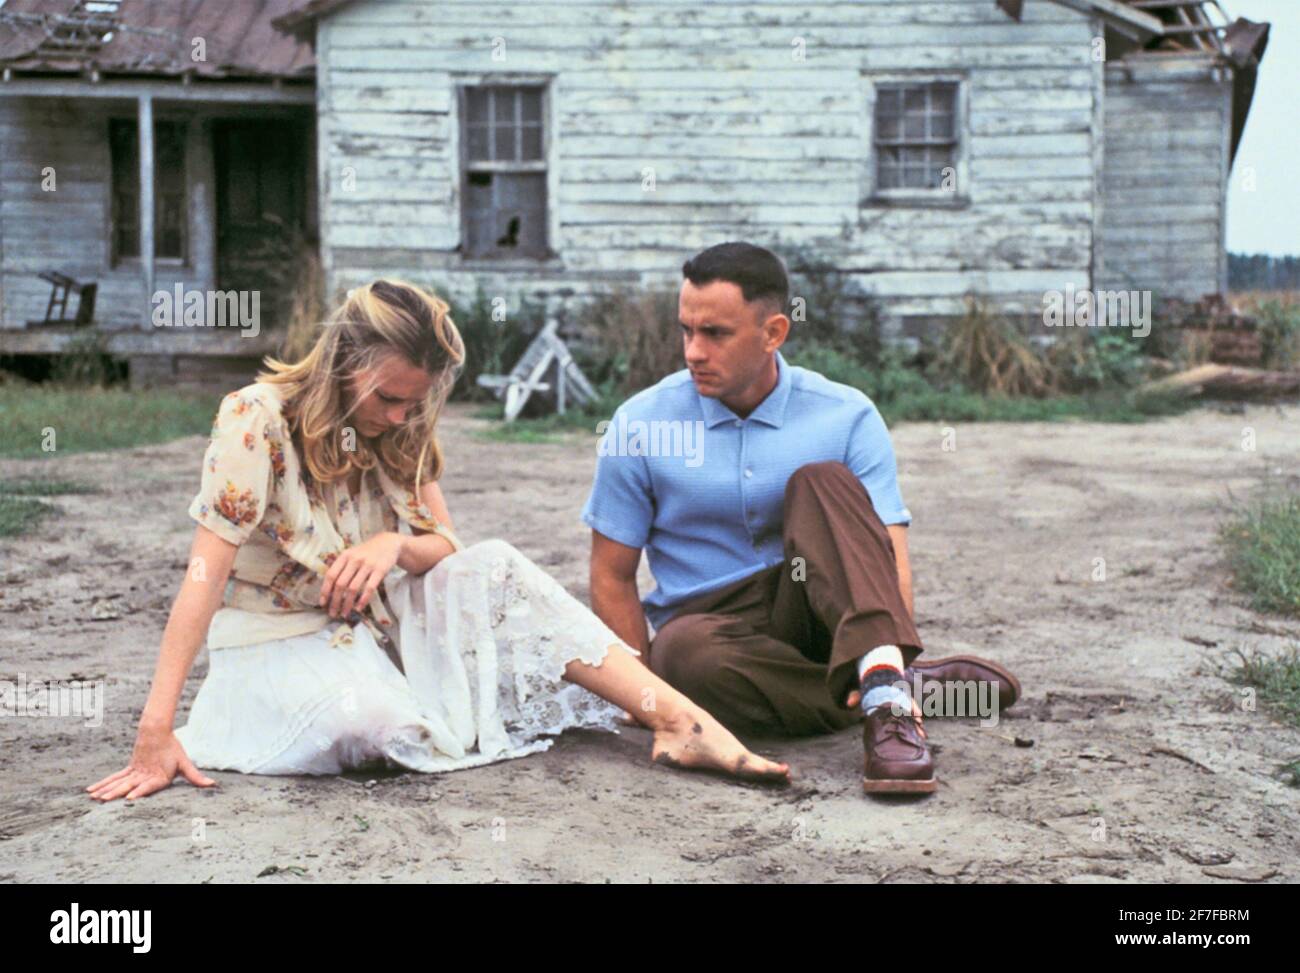 FOREST GUMP 1994 Paramount Pictures film with Tom Hanks and Robin Wright as Jenny Curran his childhood friend Stock Photo